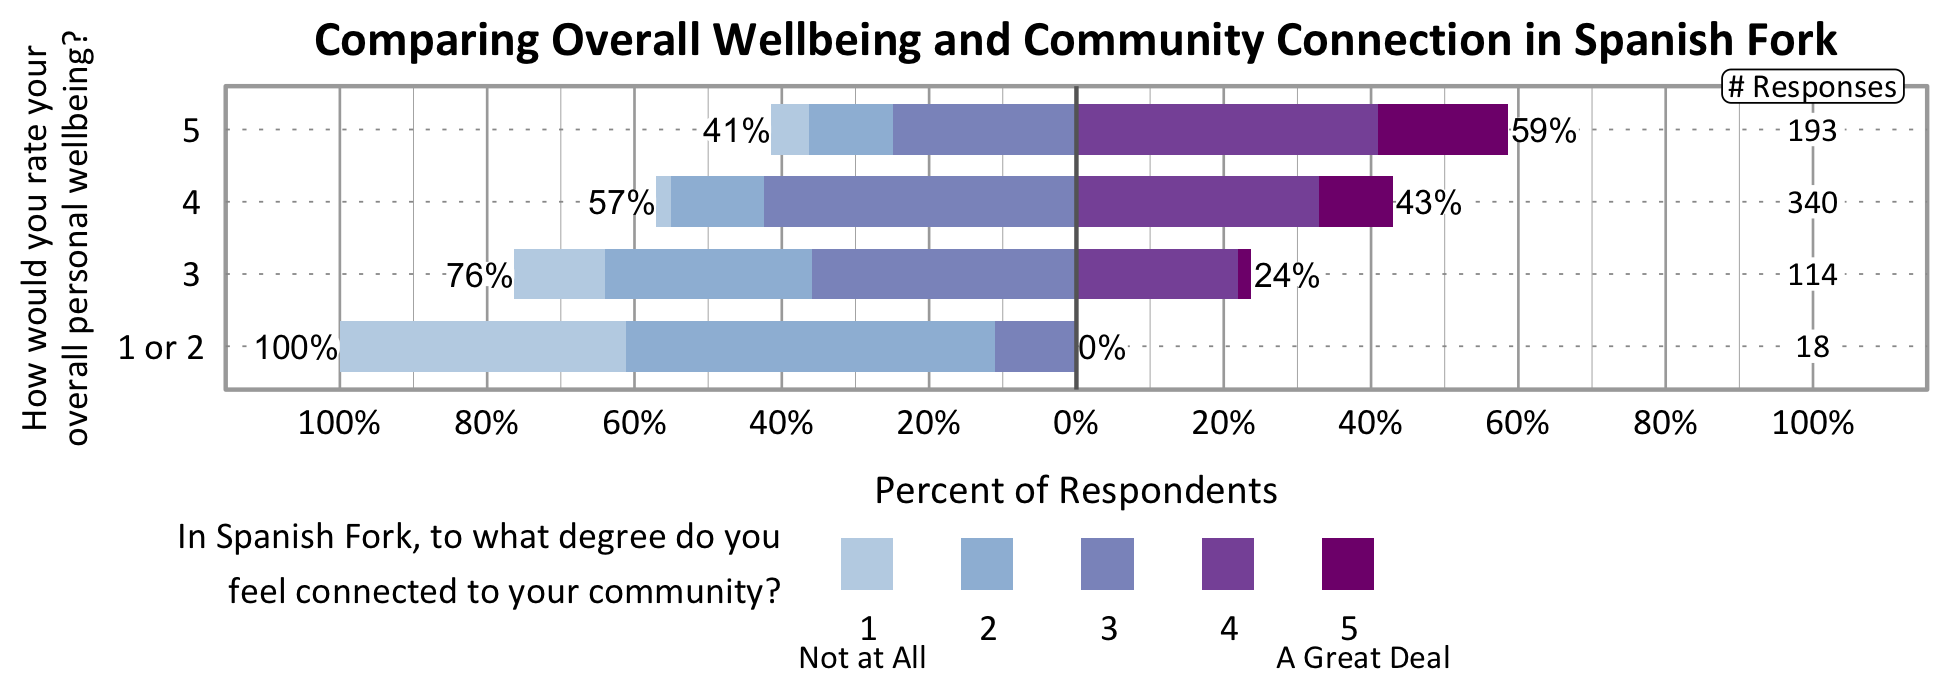 Likert Graph. Title: Comparing Overall Wellbeing and Community Connection in Spanish Fork. Of the 18 respondents that rate their overall personal wellbeing as a 1 or 2, 100% indicate a community connection score of 1, 2, or 3 while 0% indicate a community connection score of 4 or 5. Of the 114 respondents that rate their overall personal wellbeing as a 3, 76% indicate a community connection score of 1, 2, or 3 while 24% indicate a community connection score of 4 or 5. Of the 340 respondents that rate their overall personal wellbeing as a 4, 57% indicate a community connection score of 1, 2, or 3 while 43% indicate a community connection score of 4 or 5. Of the 193  participants that rate their overall wellbeing as a 5, 41% indicate a community connection score of 1, 2, or 3 while 59% indicate a community connection score of 4 or 5.